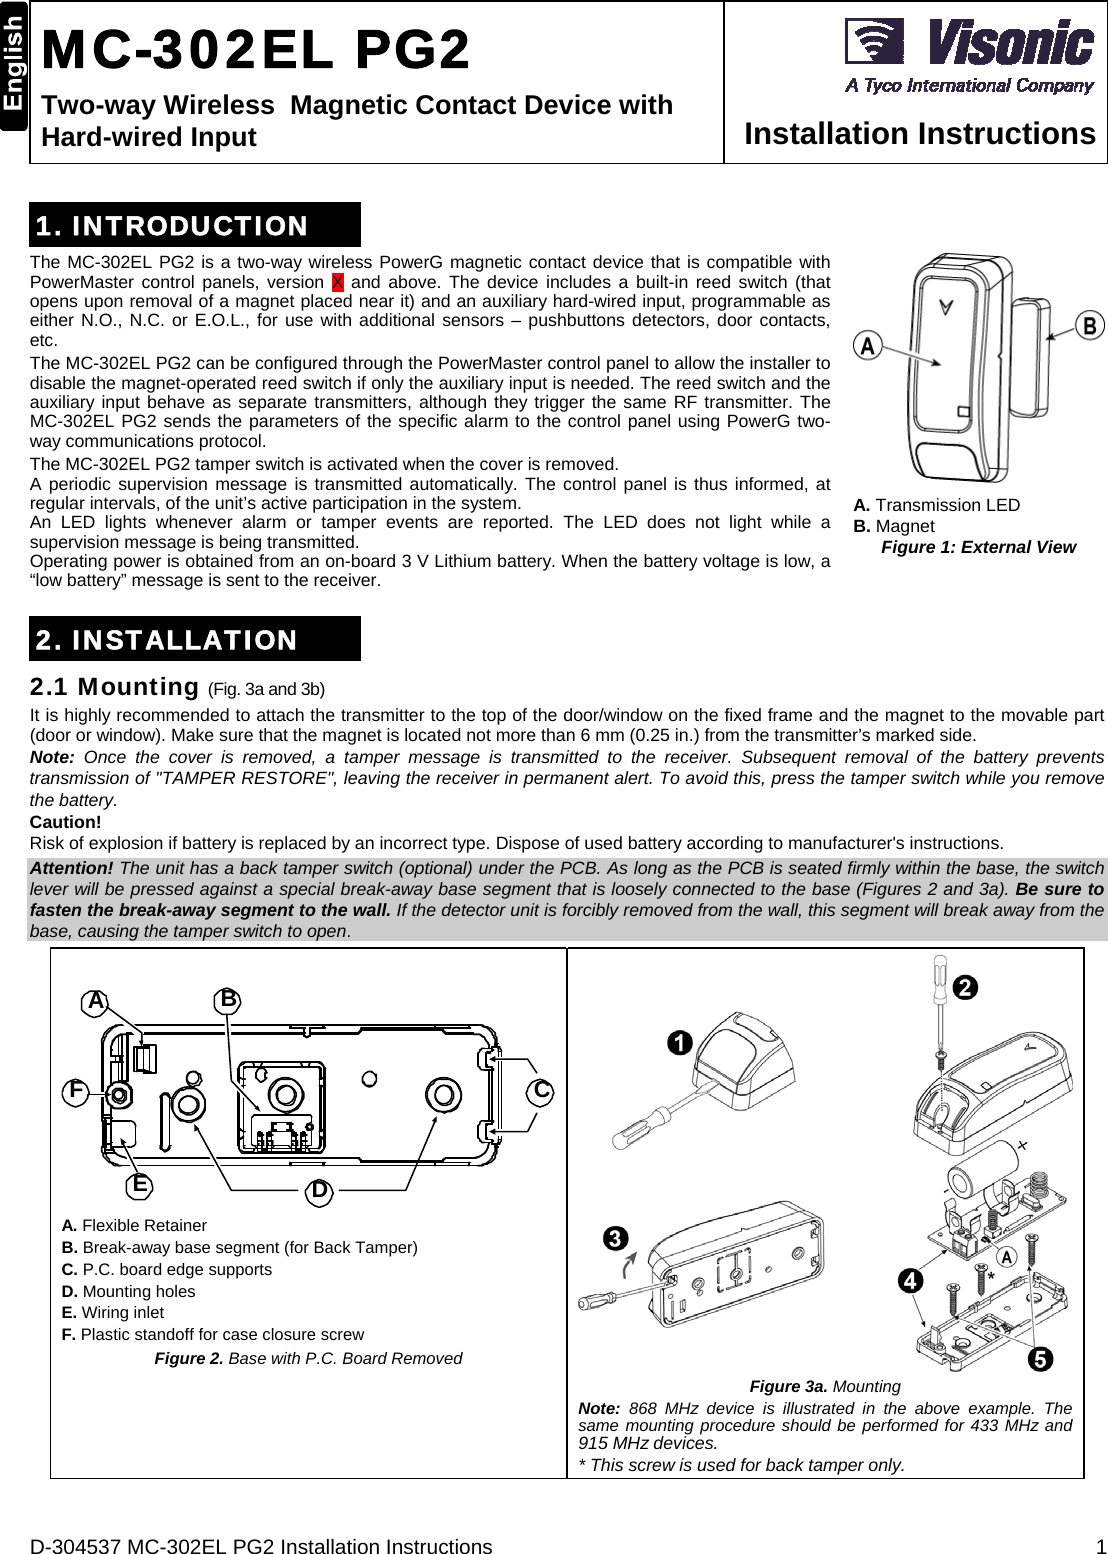 D-304537 MC-302EL PG2 Installation Instructions  1  MC-302EL PG2 Two-way Wireless  Magnetic Contact Device with Hard-wired Input  Installation Instructions 1. INTRODUCTION The MC-302EL PG2 is a two-way wireless PowerG magnetic contact device that is compatible with PowerMaster control panels, version X and above. The device includes a built-in reed switch (that opens upon removal of a magnet placed near it) and an auxiliary hard-wired input, programmable as either N.O., N.C. or E.O.L., for use with additional sensors – pushbuttons detectors, door contacts, etc. The MC-302EL PG2 can be configured through the PowerMaster control panel to allow the installer to disable the magnet-operated reed switch if only the auxiliary input is needed. The reed switch and the auxiliary input behave as separate transmitters, although they trigger the same RF transmitter. The MC-302EL PG2 sends the parameters of the specific alarm to the control panel using PowerG two-way communications protocol.  The MC-302EL PG2 tamper switch is activated when the cover is removed.  A periodic supervision message is transmitted automatically. The control panel is thus informed, at regular intervals, of the unit’s active participation in the system. An LED lights whenever alarm or tamper events are reported. The LED does not light while a supervision message is being transmitted. Operating power is obtained from an on-board 3 V Lithium battery. When the battery voltage is low, a “low battery” message is sent to the receiver.  A. Transmission LED  B. Magnet Figure 1: External View 2. INSTALLATION 2.1 Mounting (Fig. 3a and 3b) It is highly recommended to attach the transmitter to the top of the door/window on the fixed frame and the magnet to the movable part (door or window). Make sure that the magnet is located not more than 6 mm (0.25 in.) from the transmitter’s marked side.  Note:  Once the cover is removed, a tamper message is transmitted to the receiver. Subsequent removal of the battery prevents transmission of &quot;TAMPER RESTORE&quot;, leaving the receiver in permanent alert. To avoid this, press the tamper switch while you remove the battery. Caution! Risk of explosion if battery is replaced by an incorrect type. Dispose of used battery according to manufacturer&apos;s instructions. Attention! The unit has a back tamper switch (optional) under the PCB. As long as the PCB is seated firmly within the base, the switch lever will be pressed against a special break-away base segment that is loosely connected to the base (Figures 2 and 3a). Be sure to fasten the break-away segment to the wall. If the detector unit is forcibly removed from the wall, this segment will break away from the base, causing the tamper switch to open. BACDEF A. Flexible Retainer B. Break-away base segment (for Back Tamper) C. P.C. board edge supports D. Mounting holes E. Wiring inlet F. Plastic standoff for case closure screw Figure 2. Base with P.C. Board Removed   Figure 3a. Mounting Note: 868 MHz device is illustrated in the above example. The same mounting procedure should be performed for 433 MHz and 915 MHz devices. * This screw is used for back tamper only. 